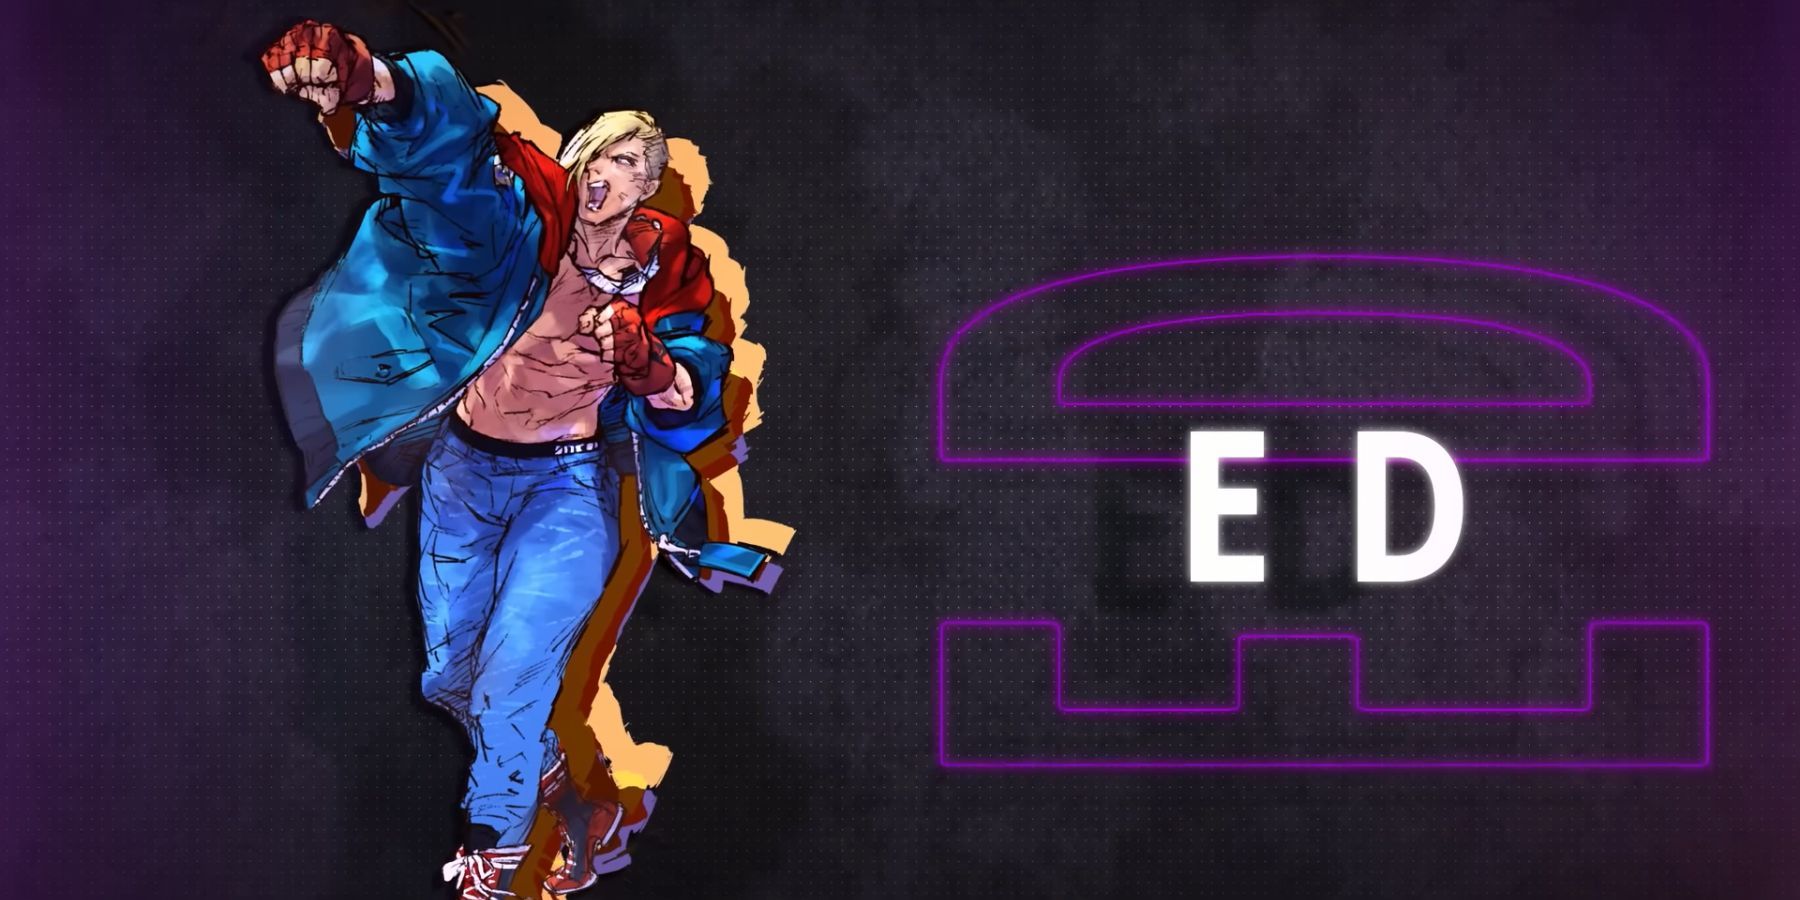 image showing ed the year-one dlc character in street fighter 6.